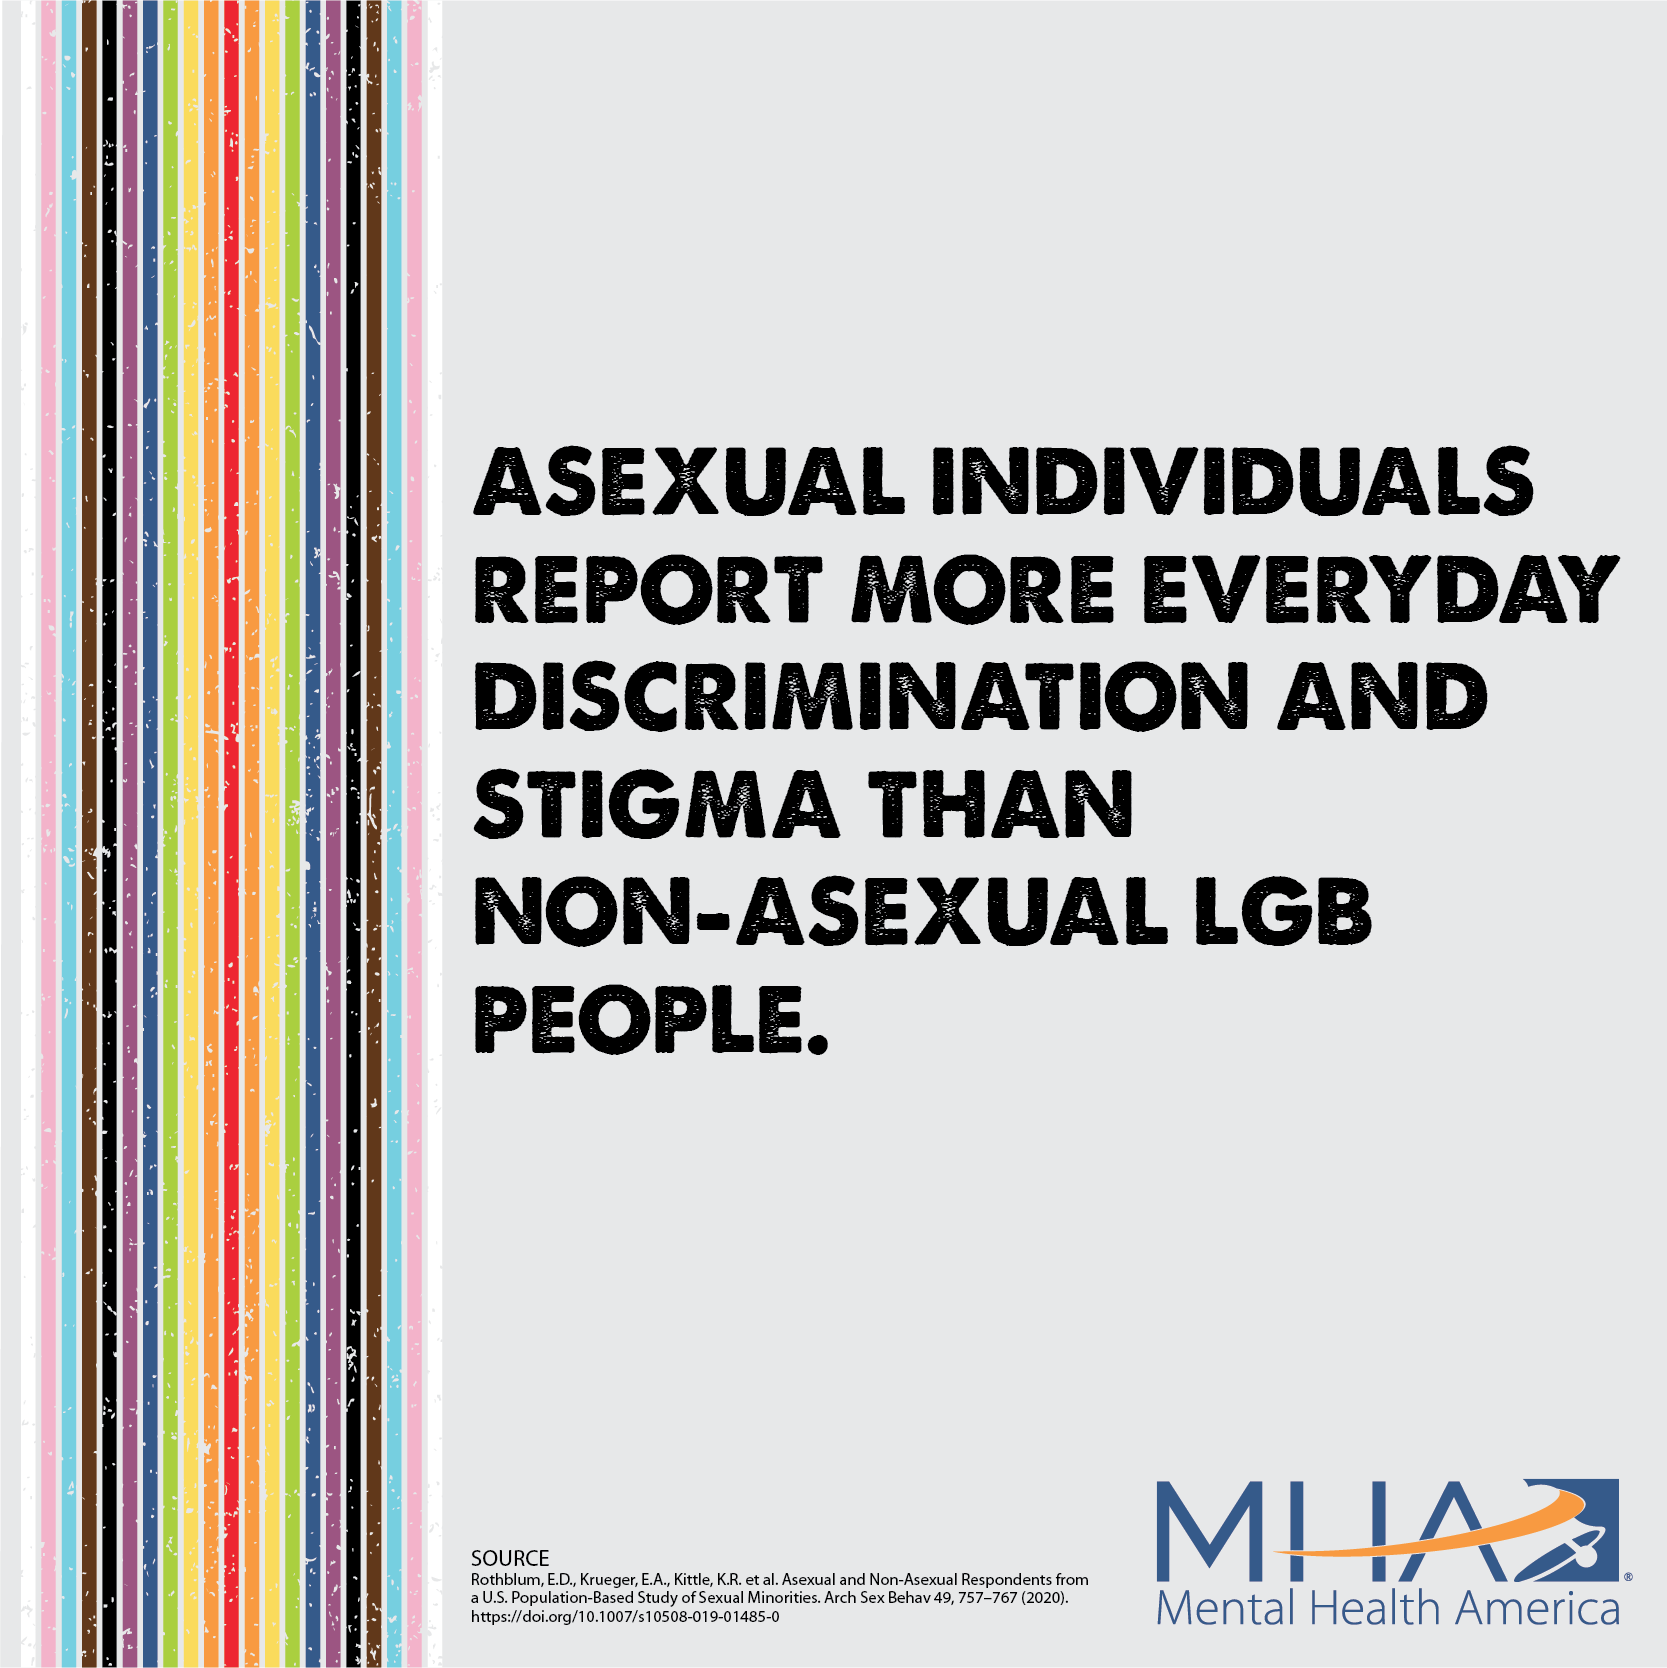 Asexual individuals report more everyday discrimination and stigma than non-asexual LGB people.